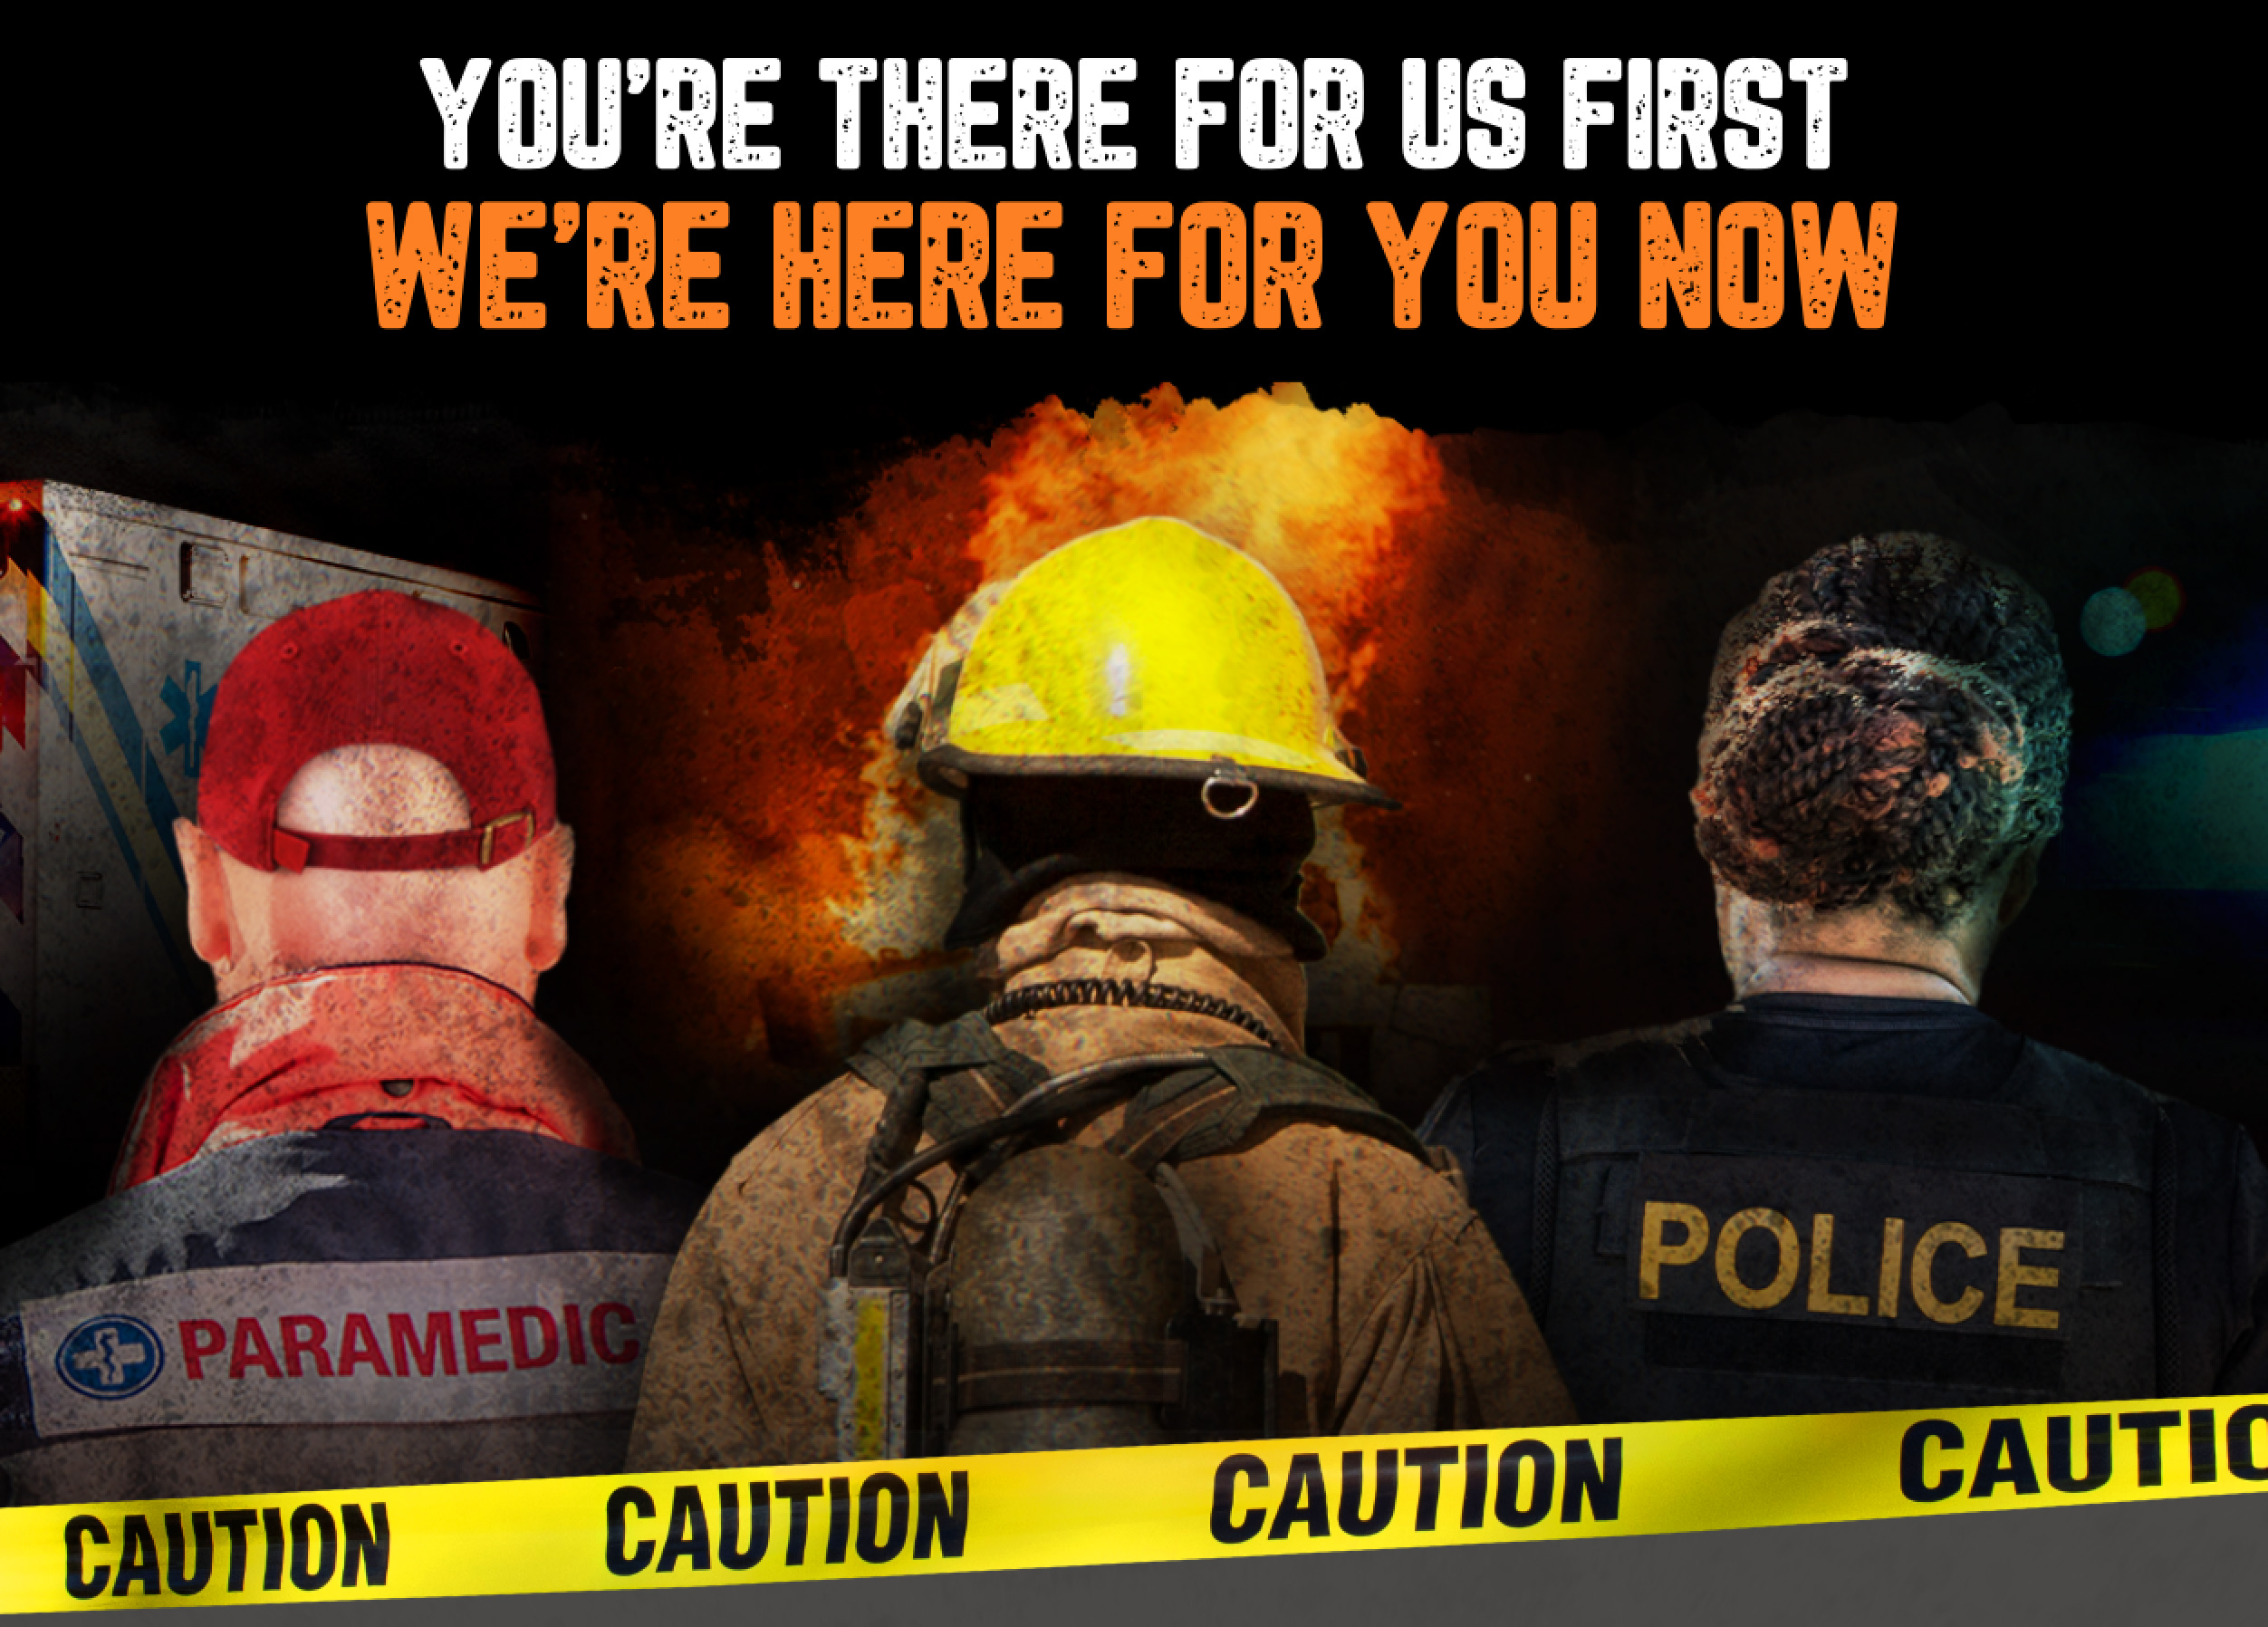 first responders